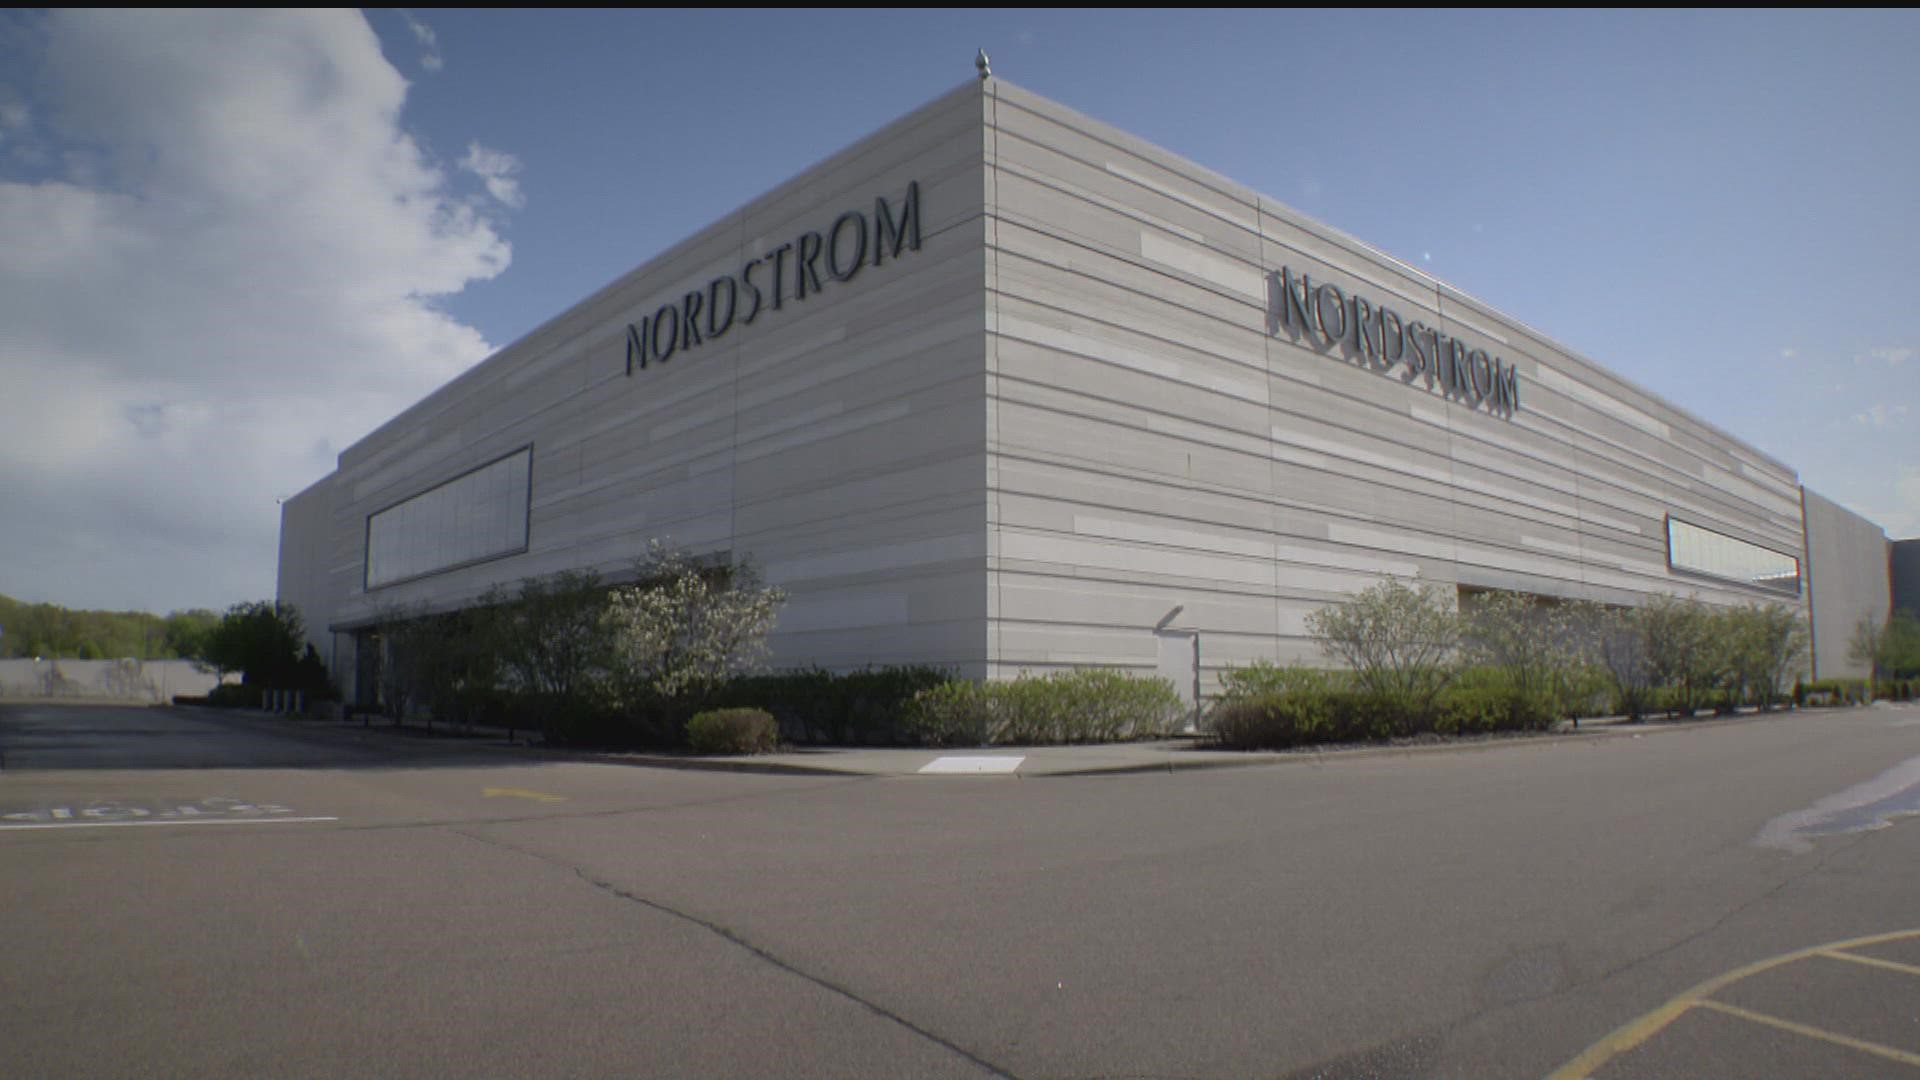 Nordstrom has announced it will be laying off 67 workers at their fulfillment center in Tukwila and moving that operation to Iowa in 2024